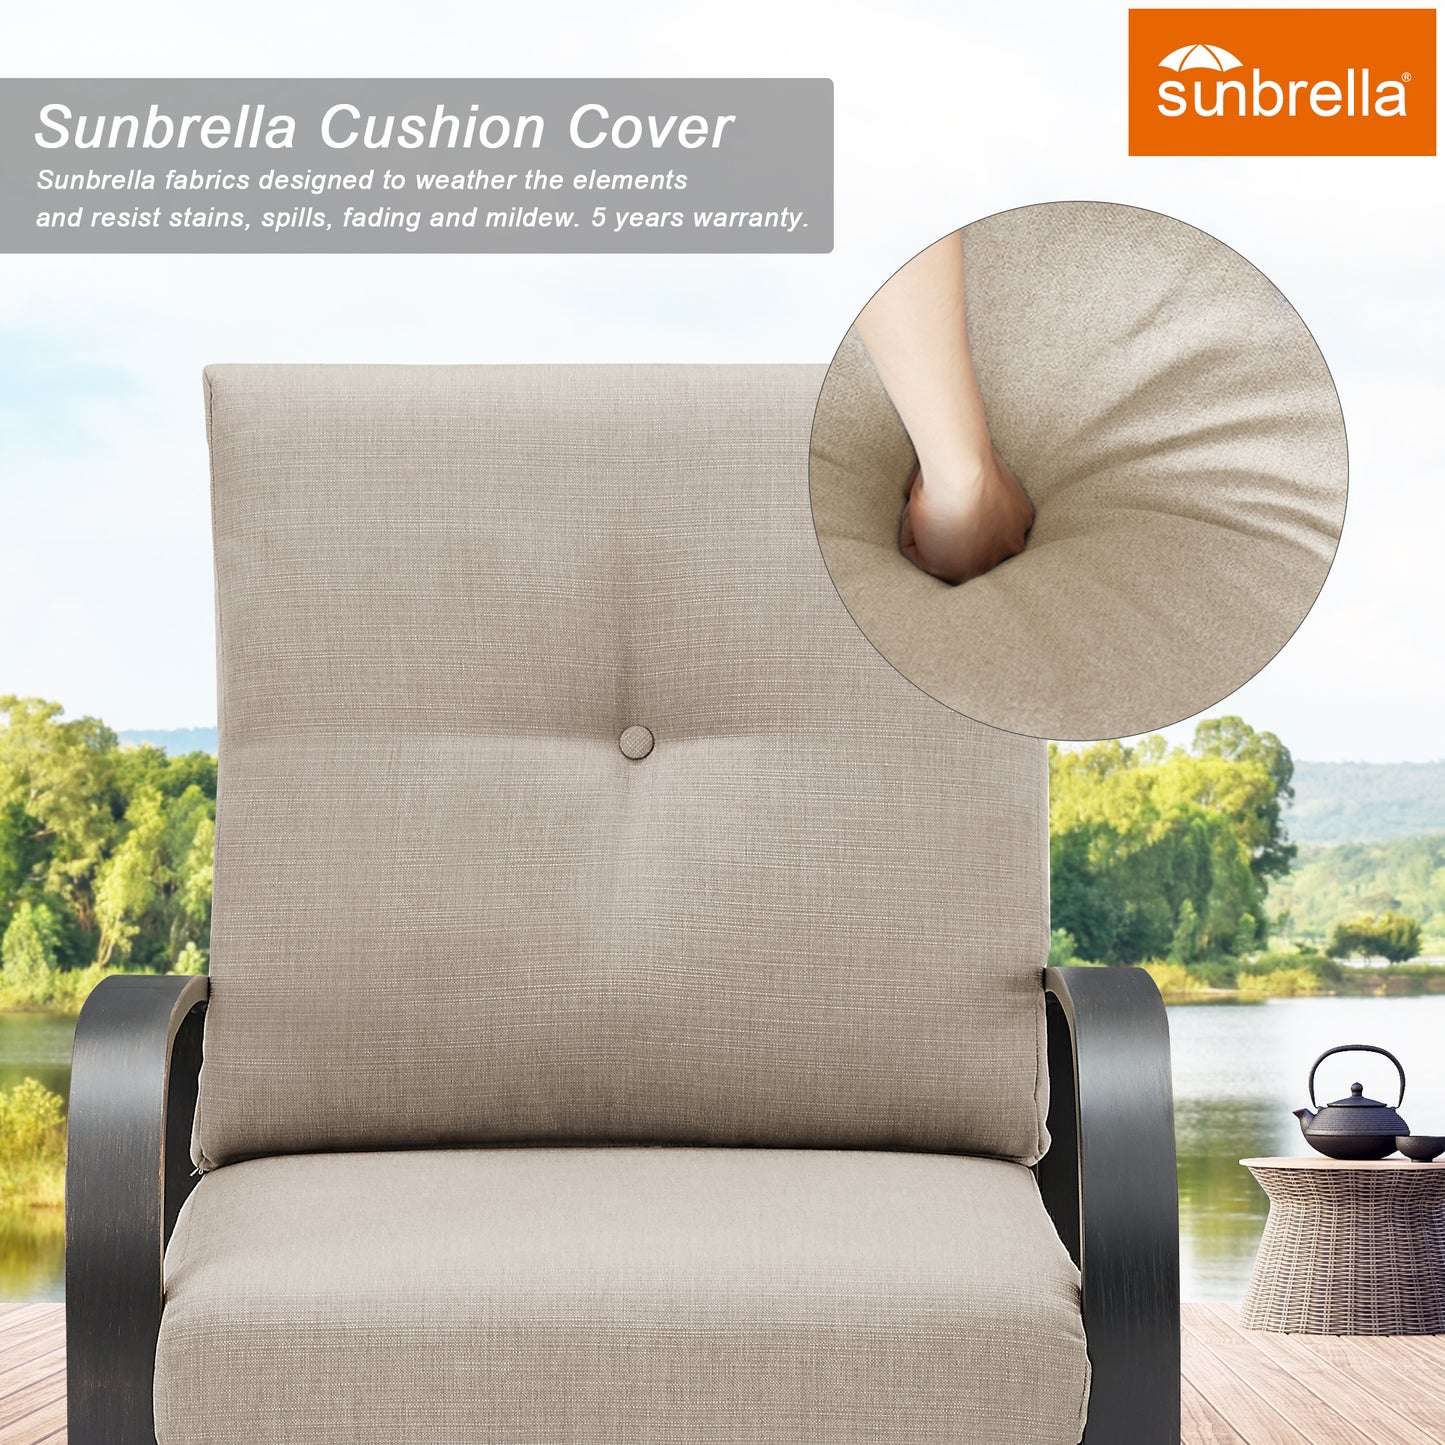 3 Pieces Outdoor/Indoor Aluminum Patio Conversation Set with Motion Rocking Chairs, Sunbrella Cusihons and Side Table